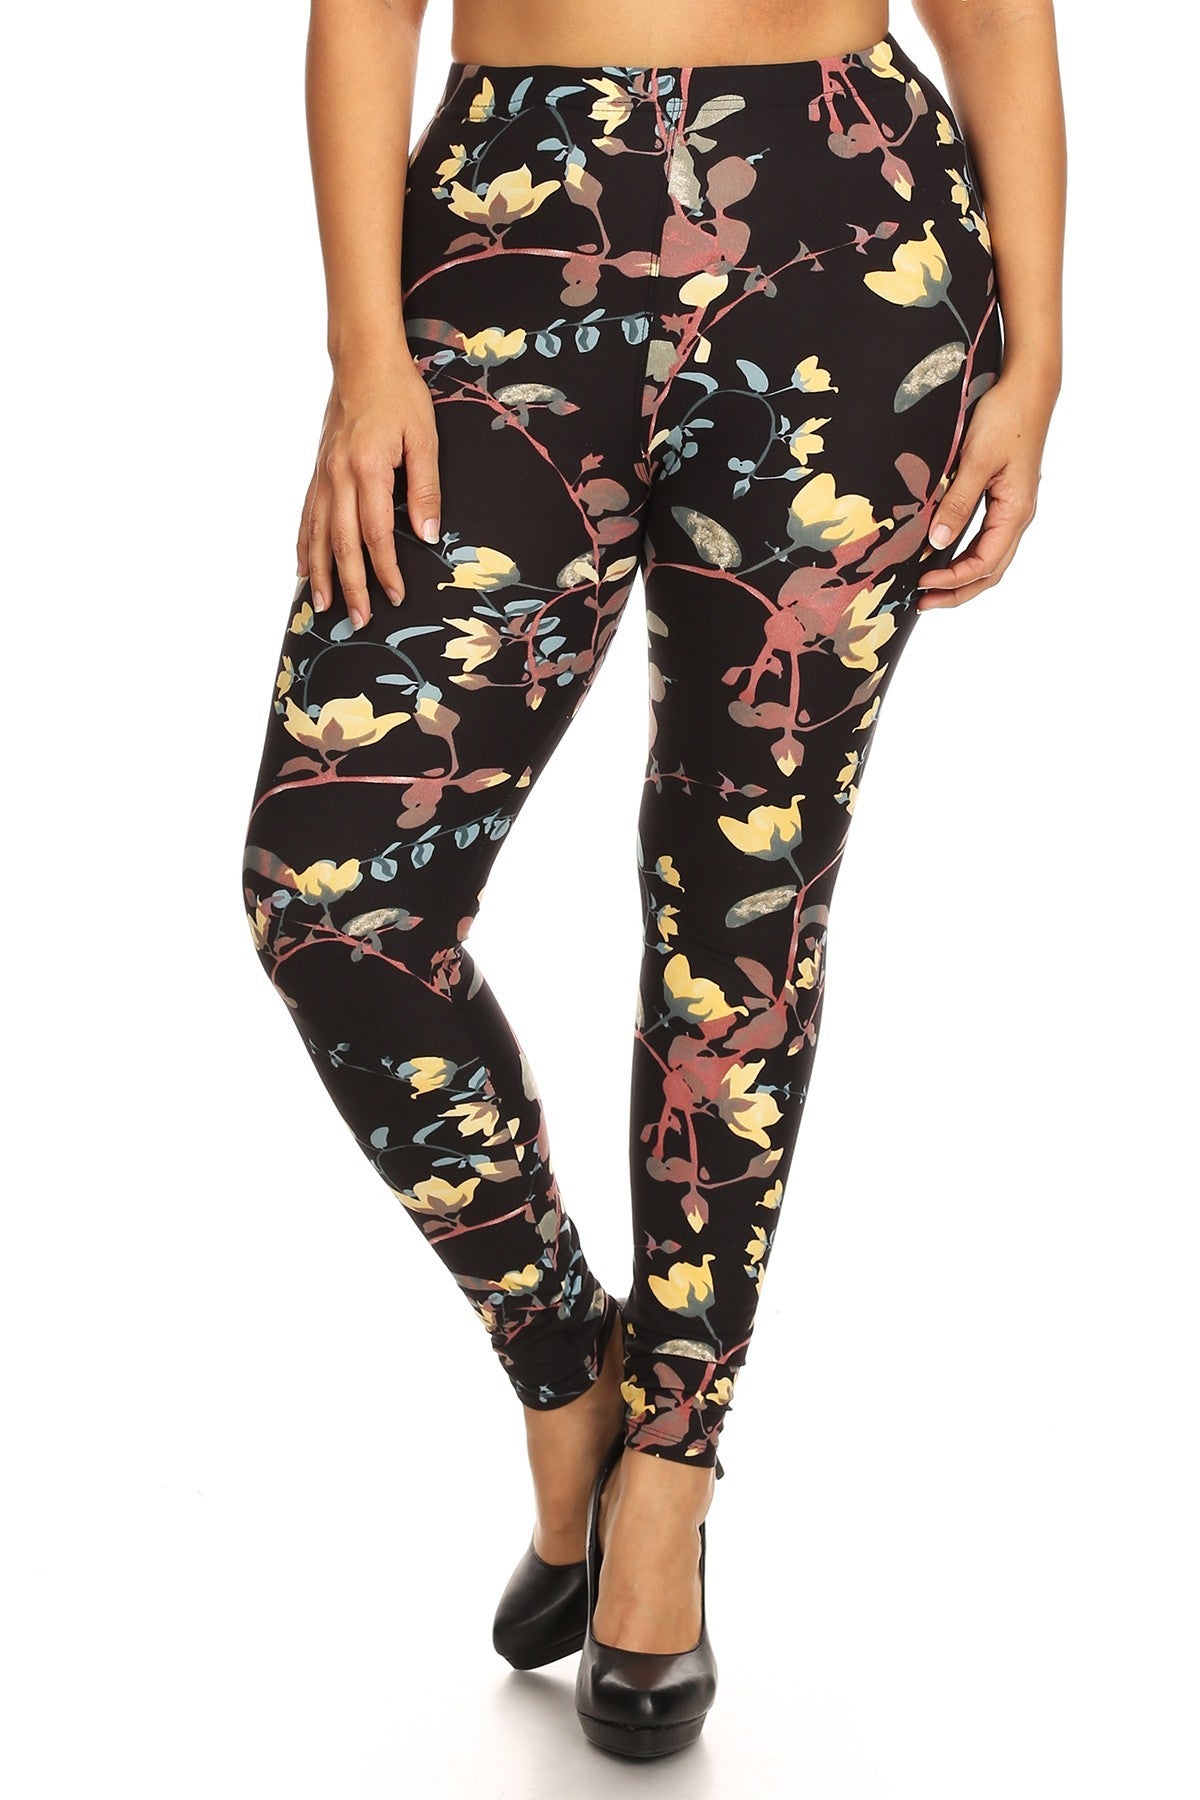 Plus Size Floral Print, Full Length Leggings In A Slim Fitting Style With A Banded High Waist Bottoms jehouze 